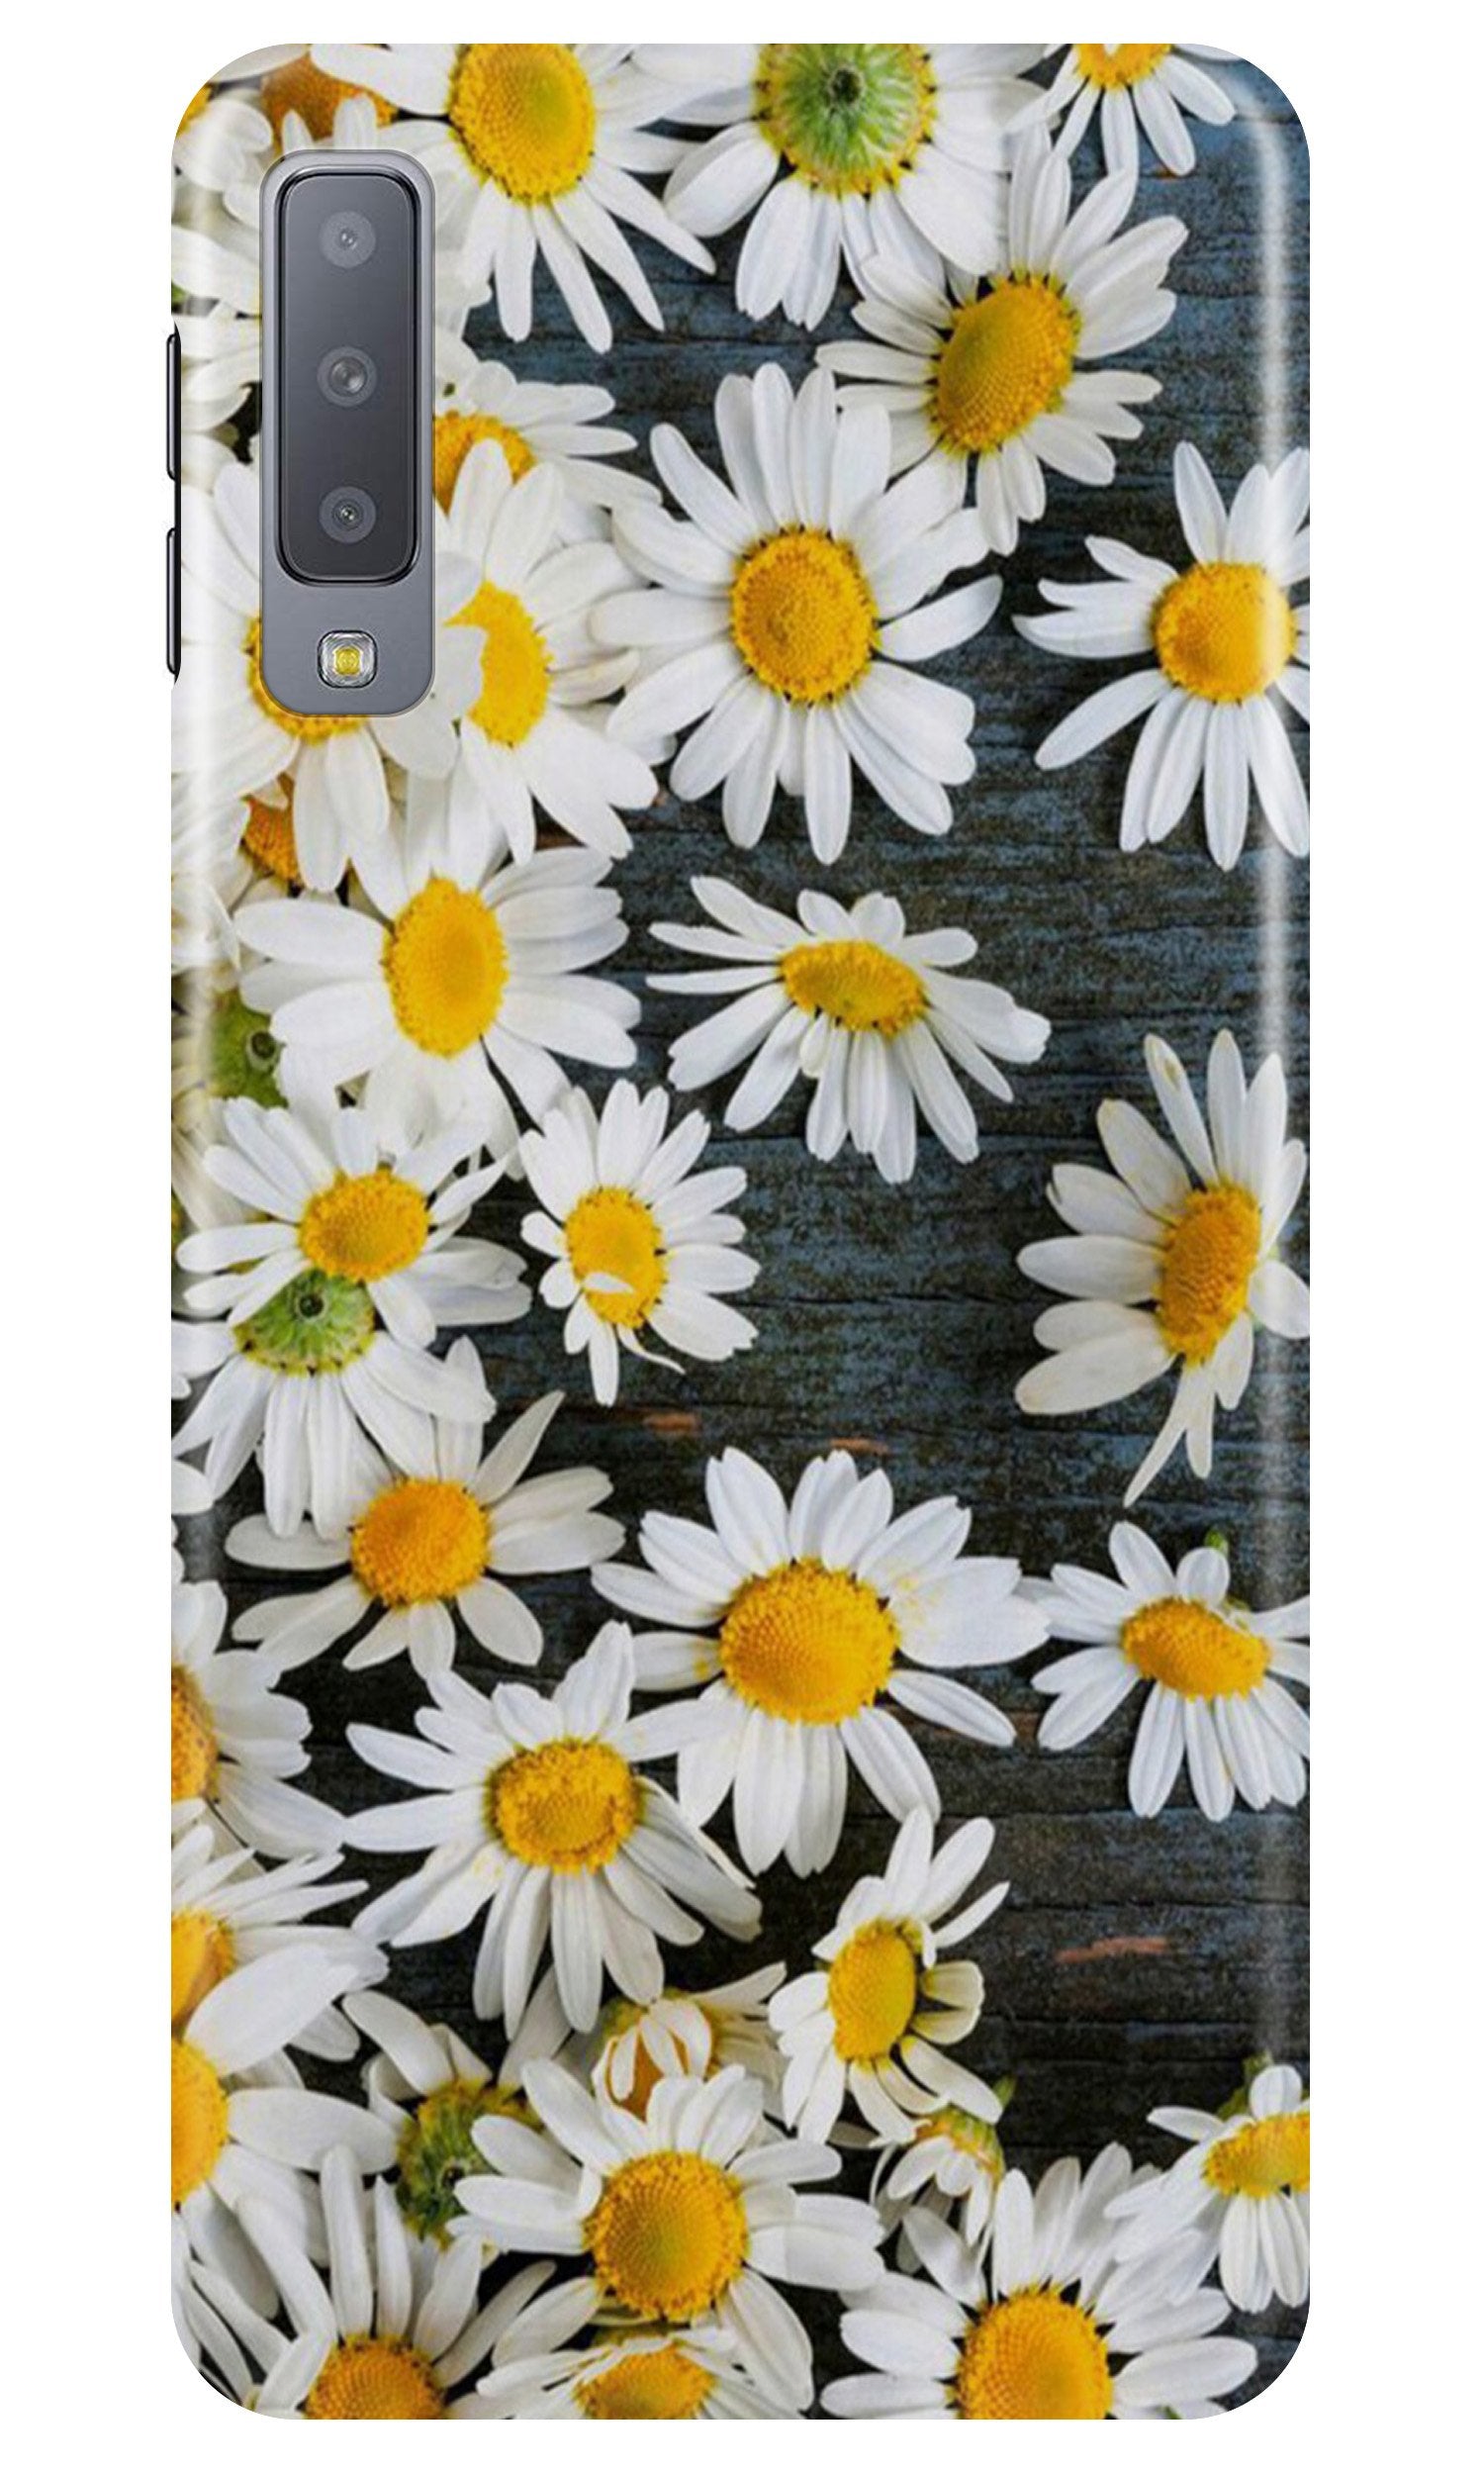 White flowers2 Case for Samung Galaxy A70s